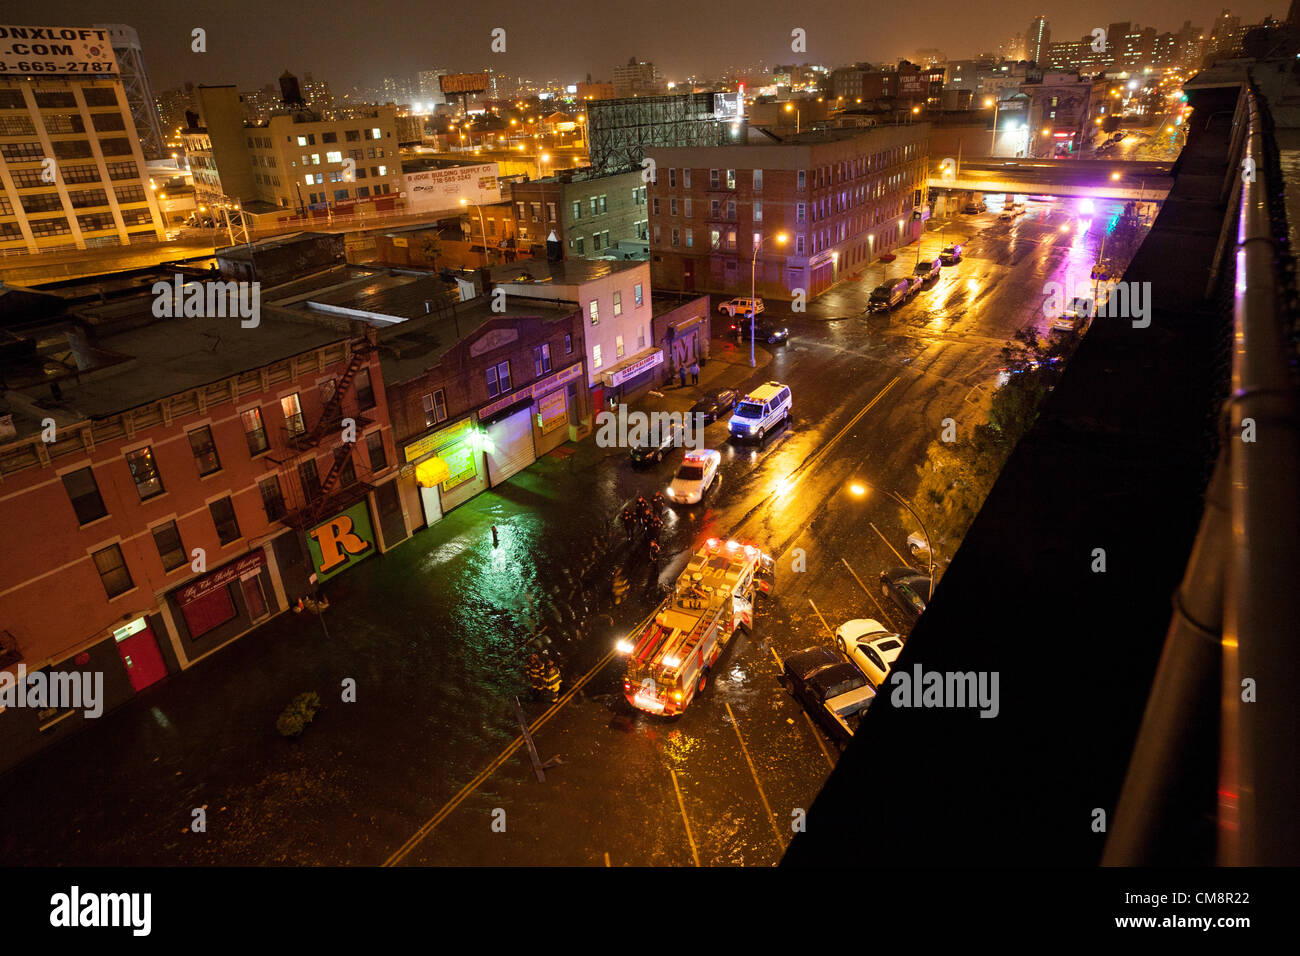 29th October 2012. Flooding from Hurricane Sandy in New York City, USA. Police and fire department responding by shutting down roads. Stock Photo